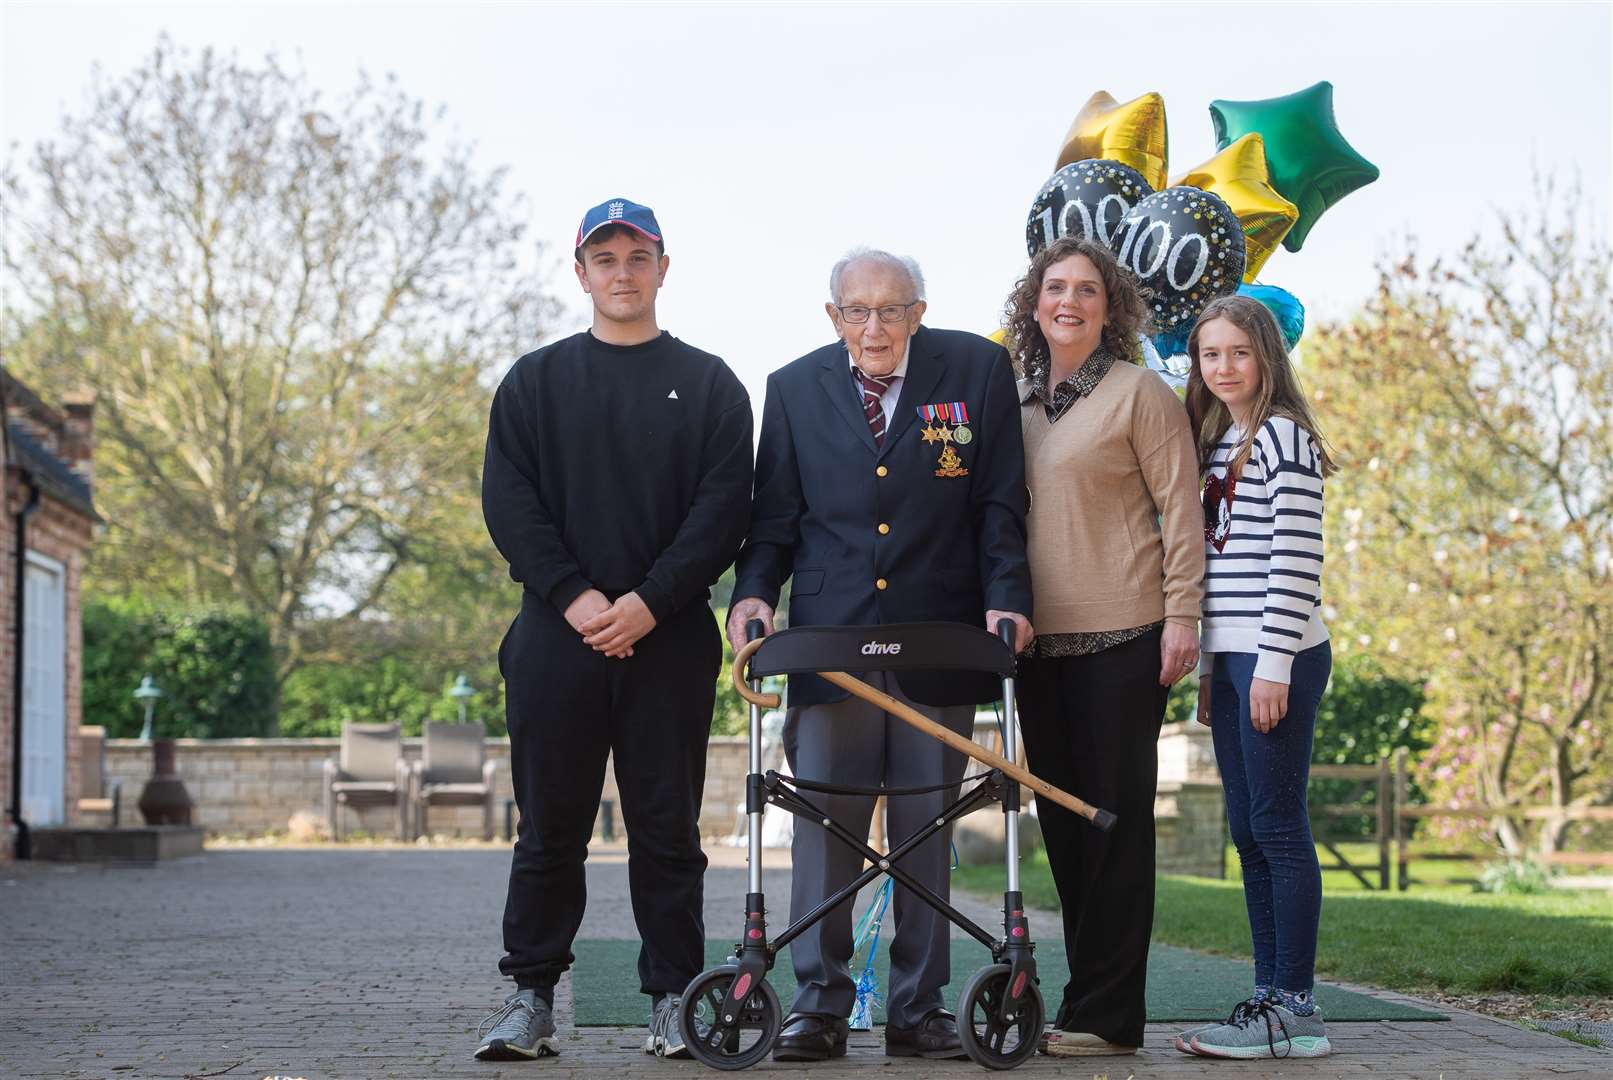 Captain Tom Moore and family at his home in Marston Moretaine, Bedfordshire (Joe Giddens/PA)